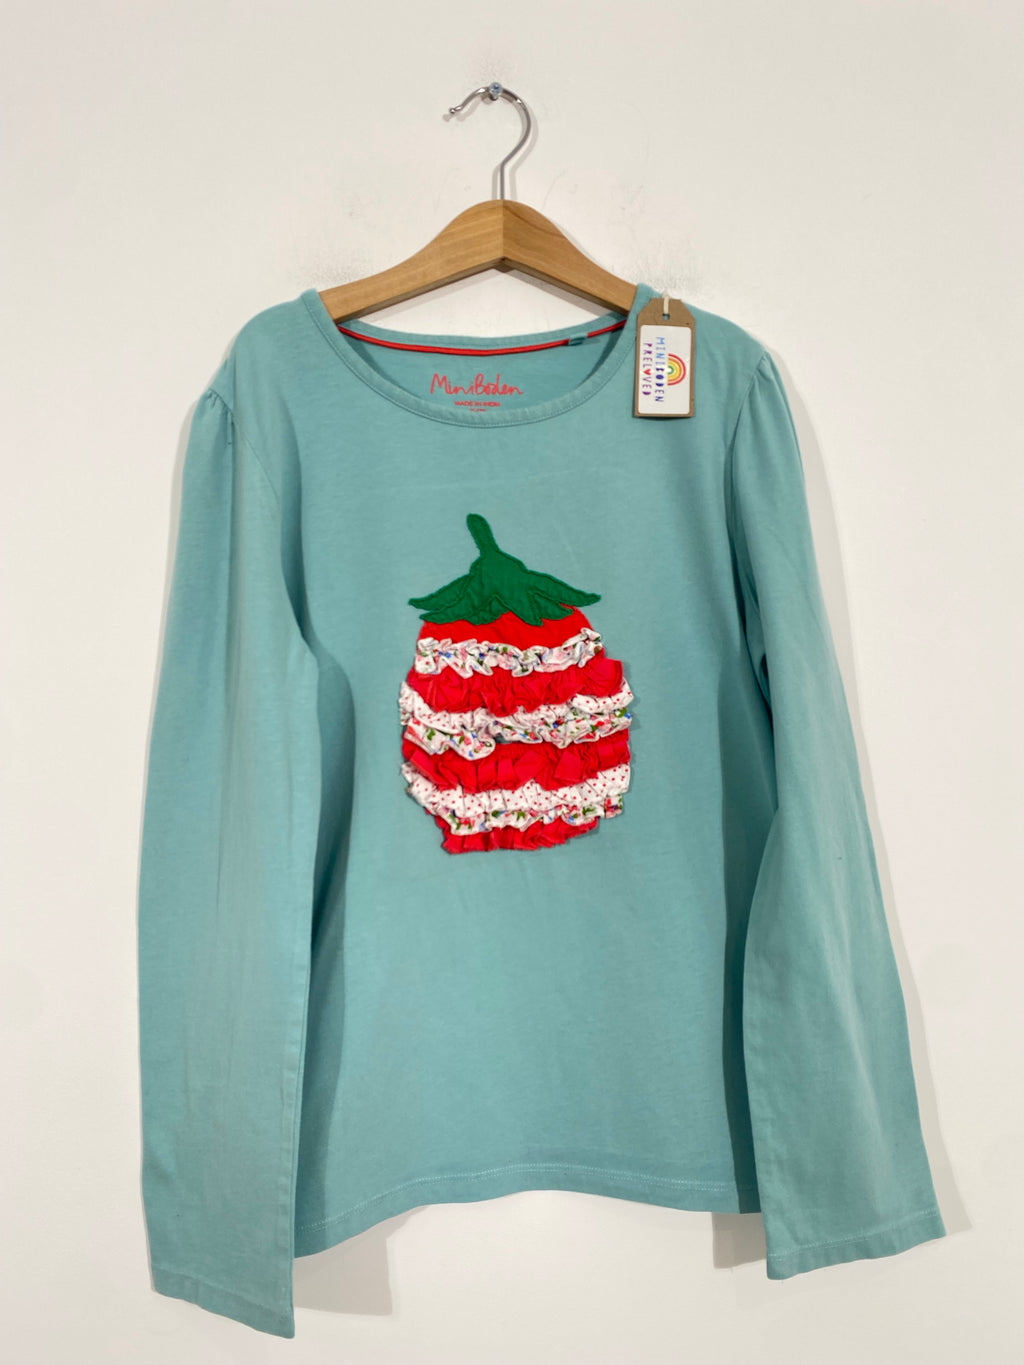 Lovely Teal Applique Ruffle Strawberry Top (11-12 Years)